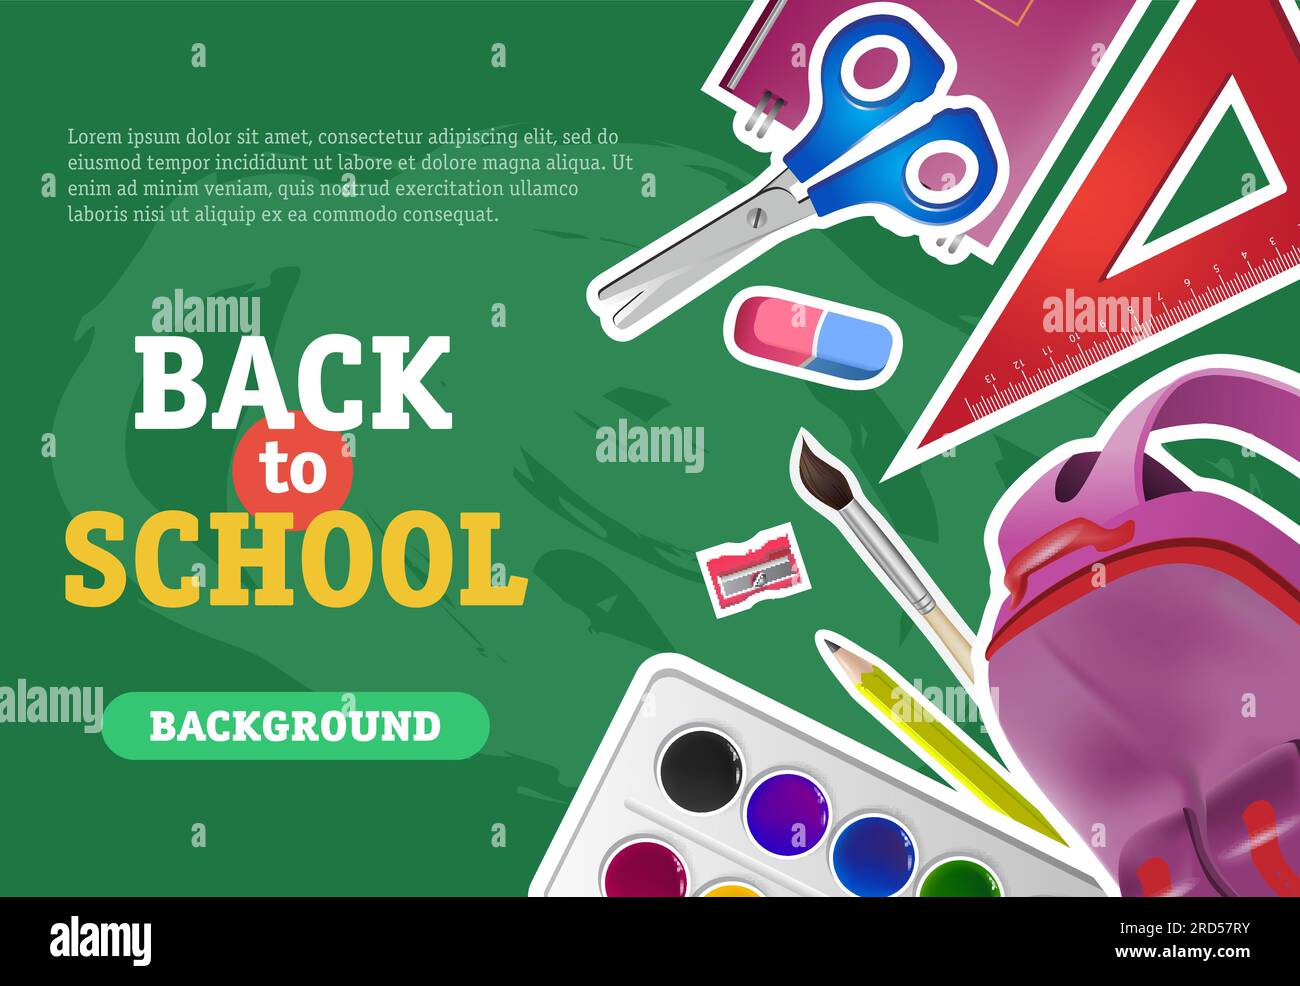 Back to school, background lettering with backpack, scissors Stock Vector